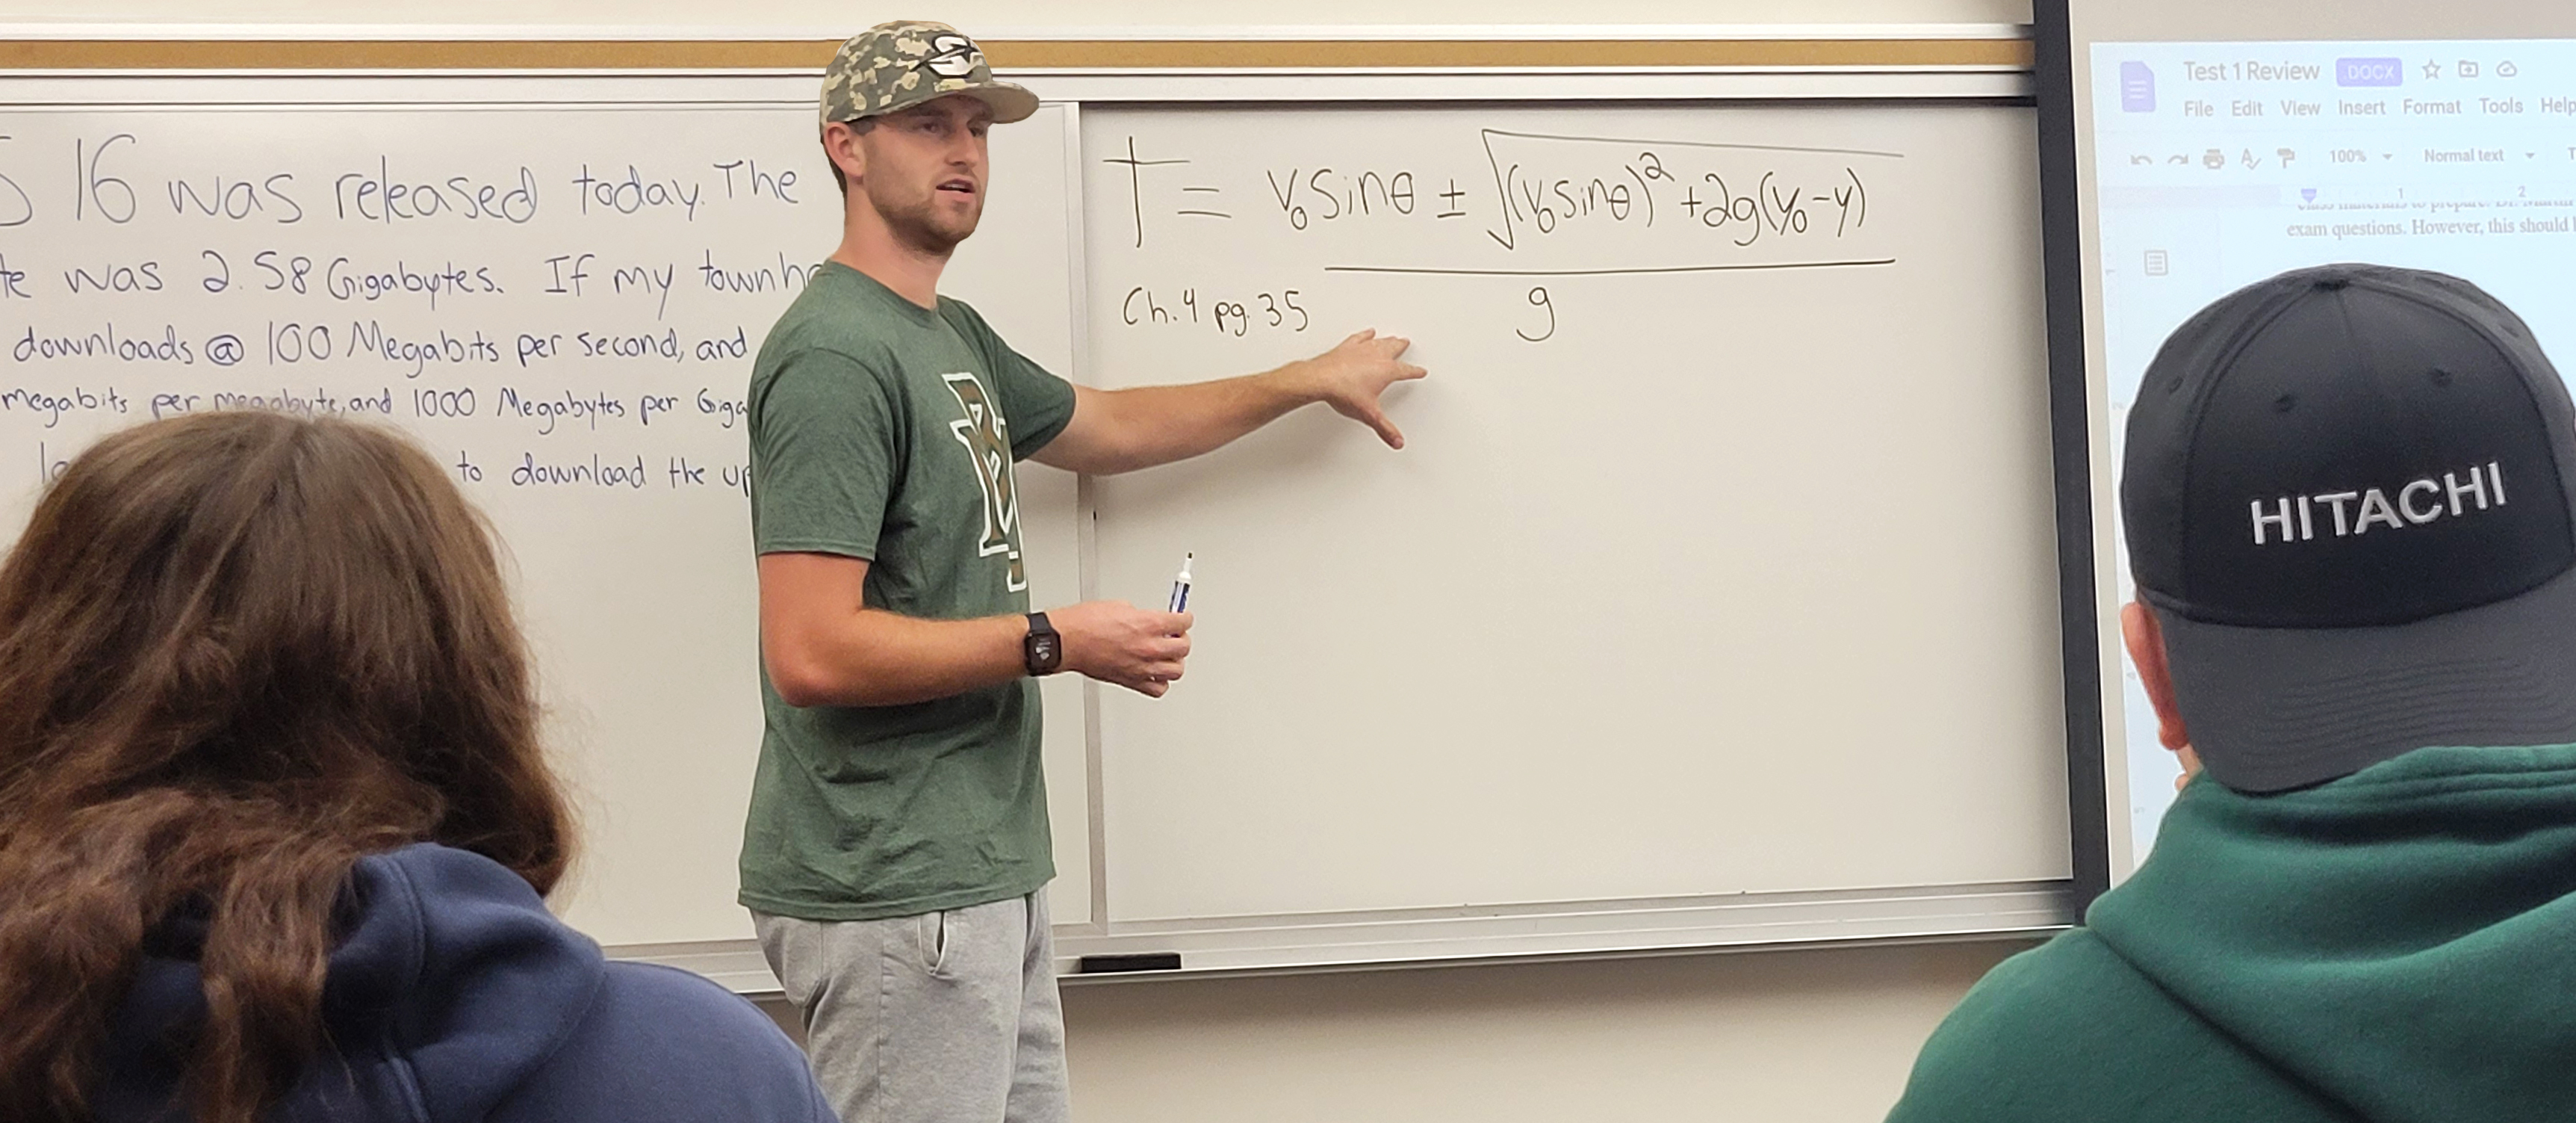 Clark, the Physics S I Leader, covers a sample problem on the white board with his students for their exam review during the S I Session